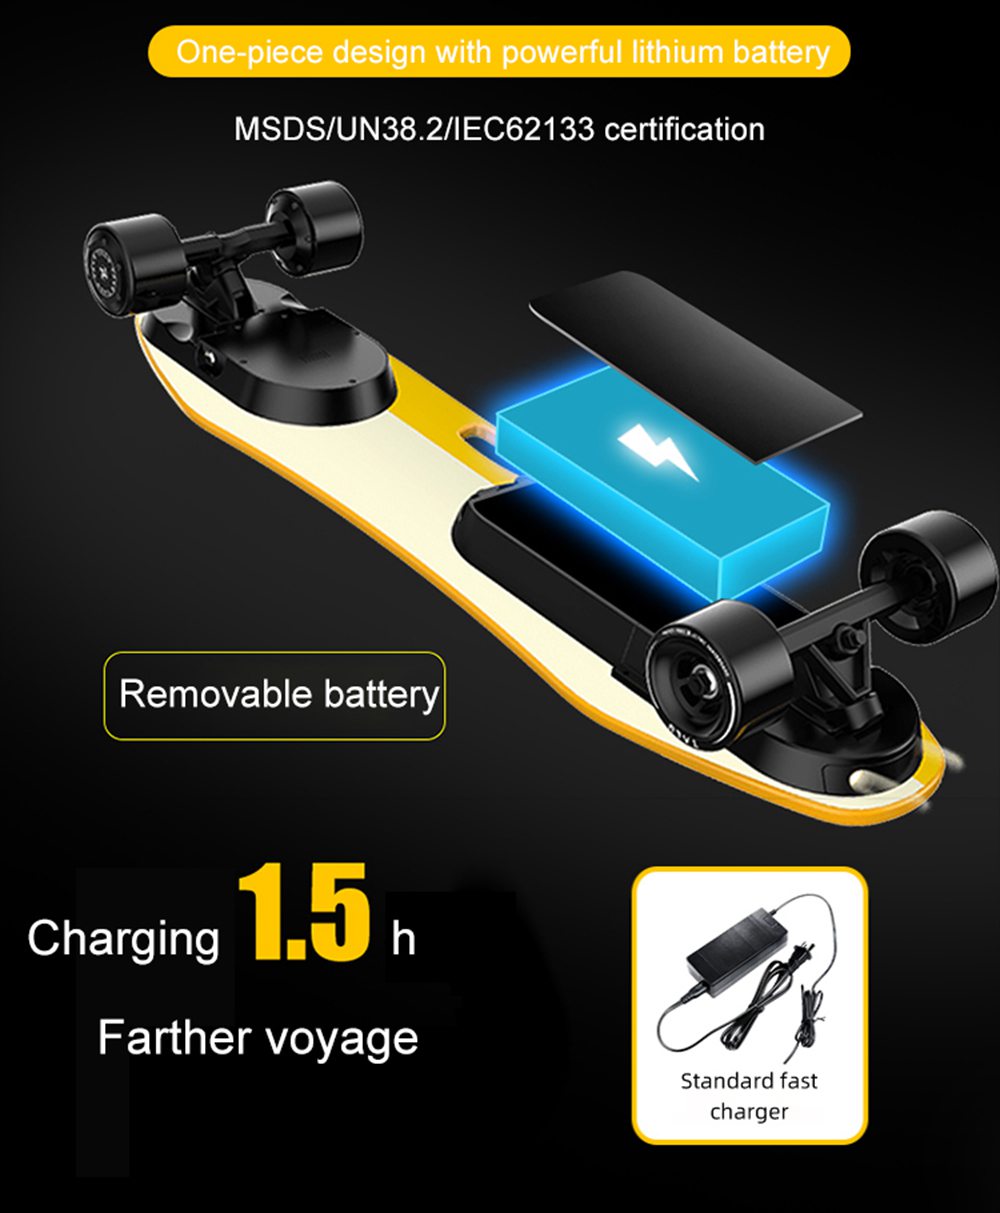 TALU TL-A001 Electric Skateboard 83mm Detachable Tires 360W Motor LG 99.6WH Battery Max 30km/h Speed Up To 15km Range Body Control For Adults - Black